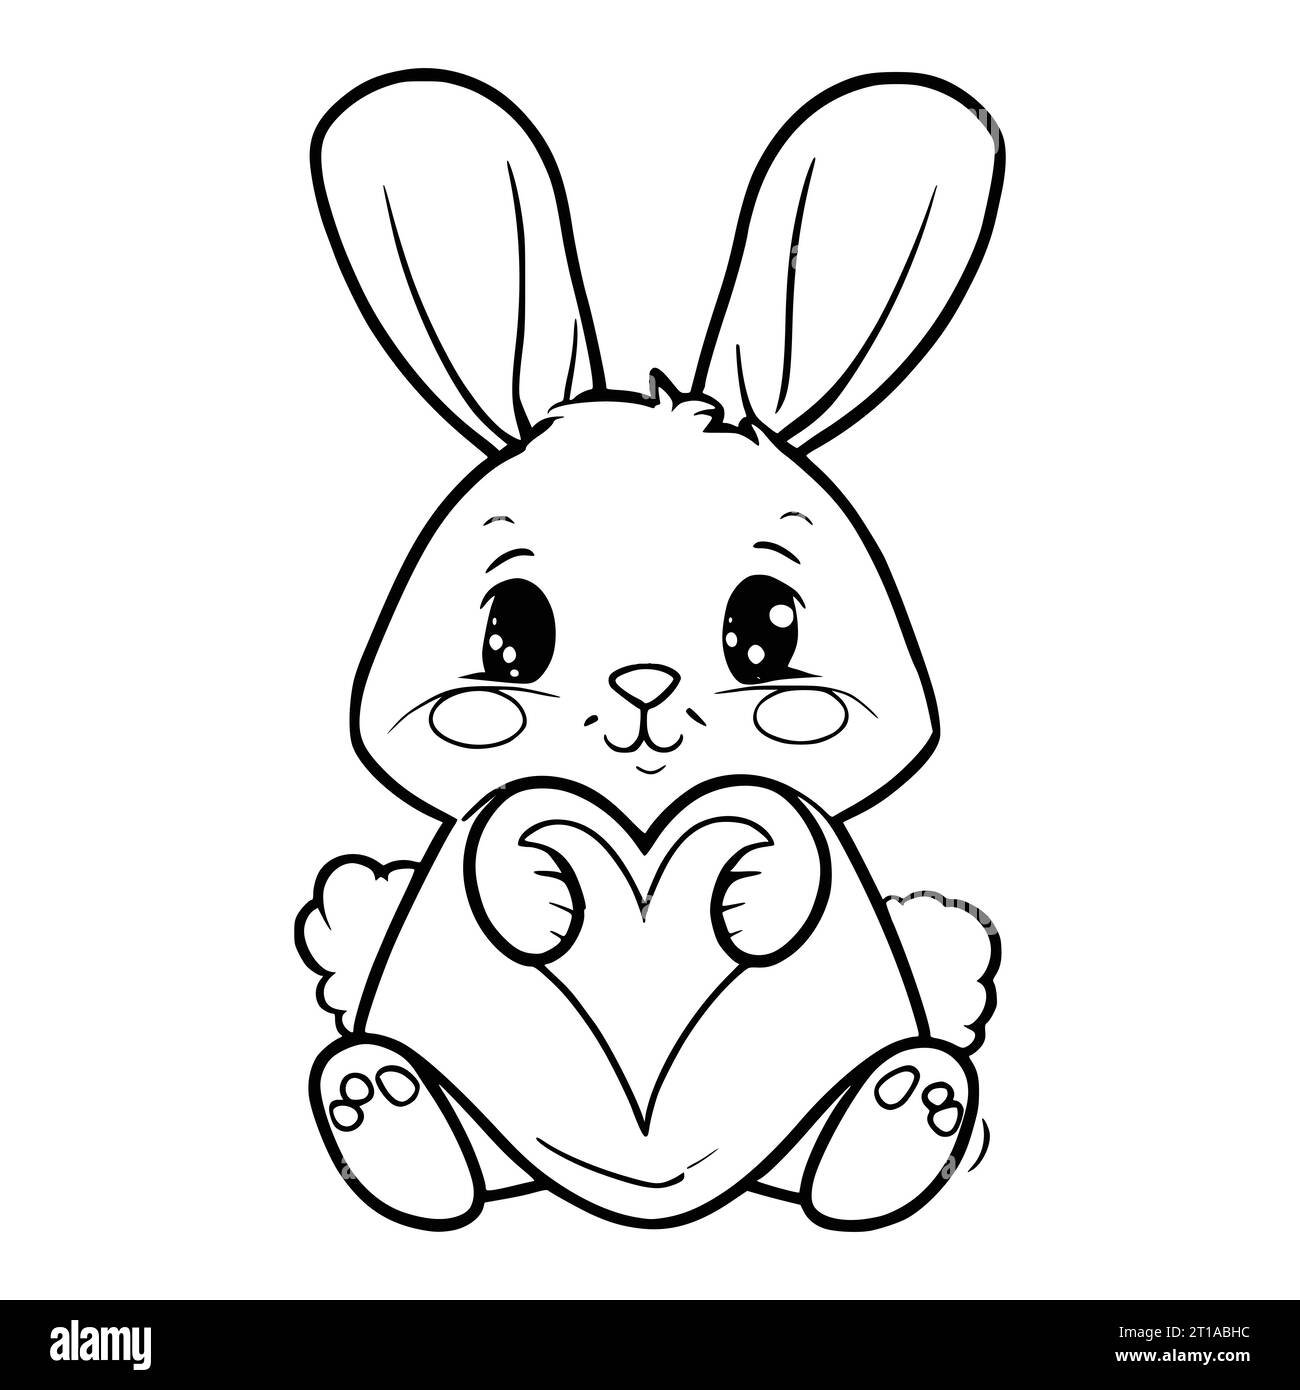 Rabbit and Heart Coloring Pages for Kids and Toddlers Stock Vector